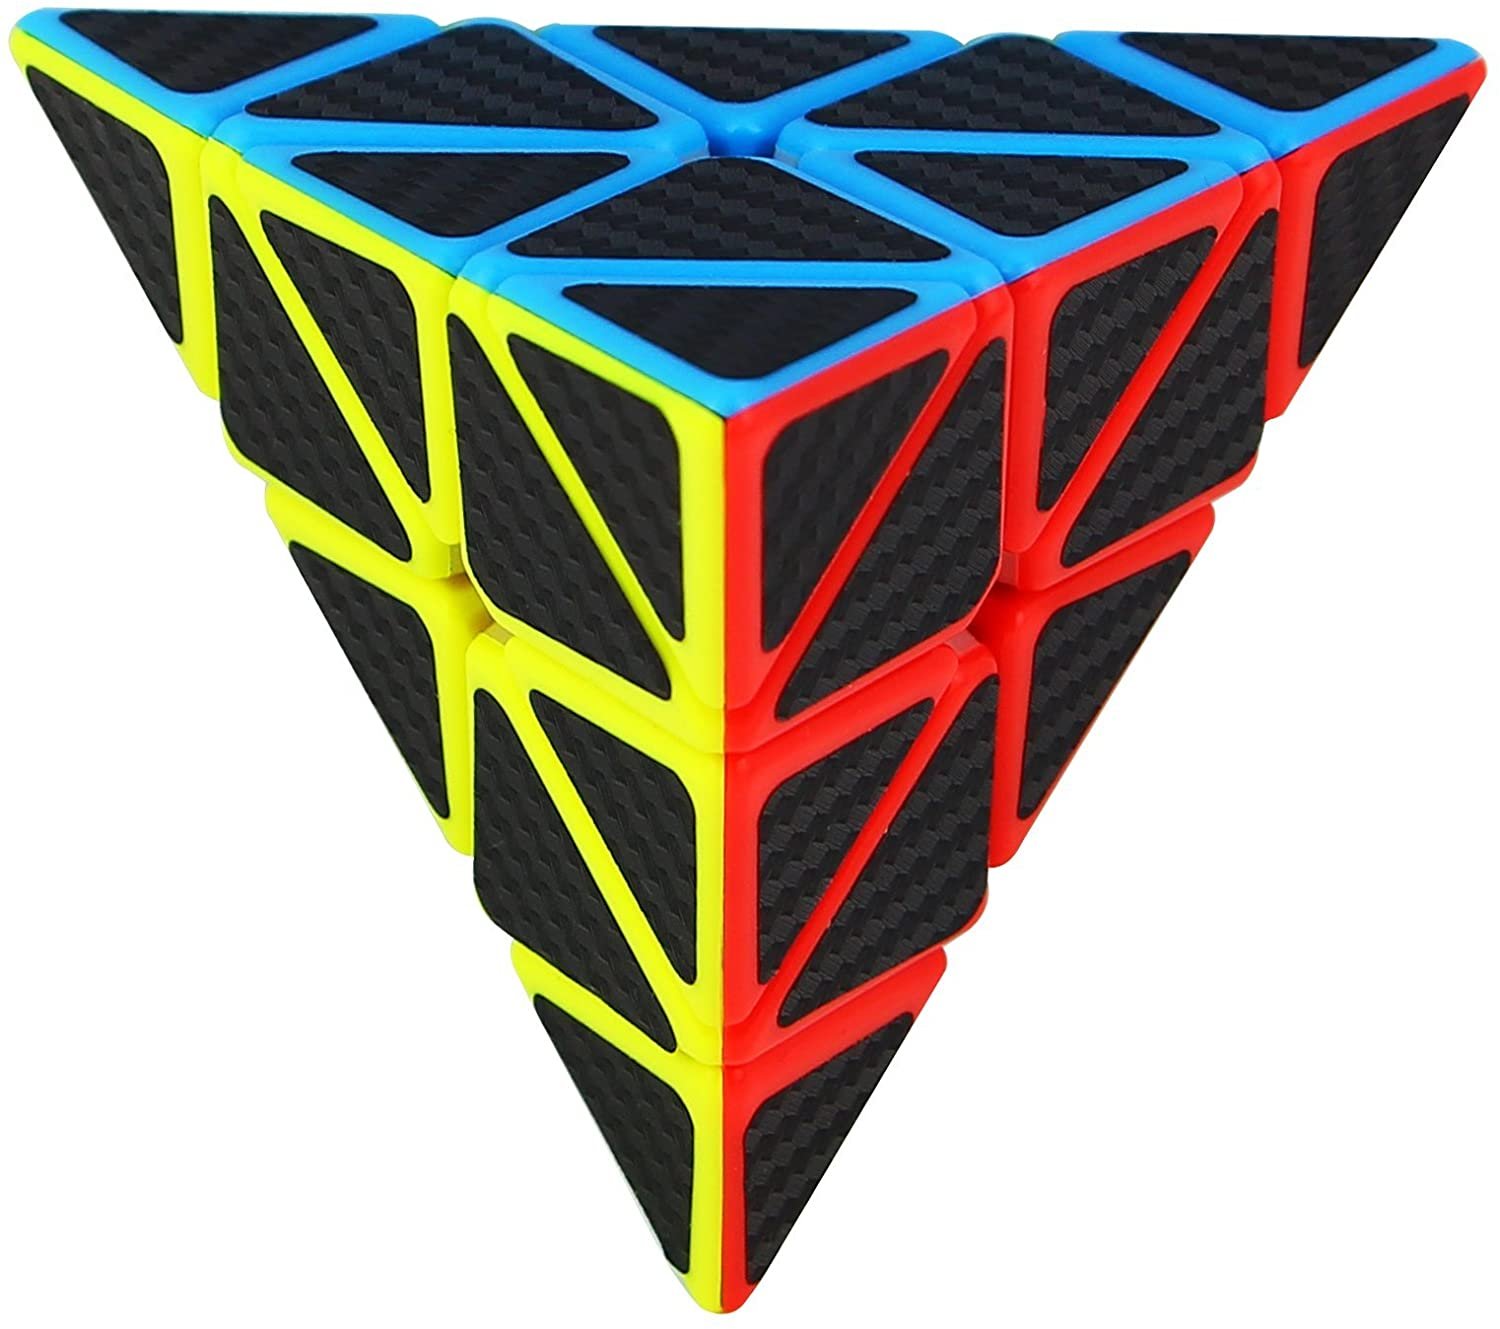 Dreampark Pyramid Speed Cube, Triangle Carbon Fiber Sticker Twisty Puzzle for Kids